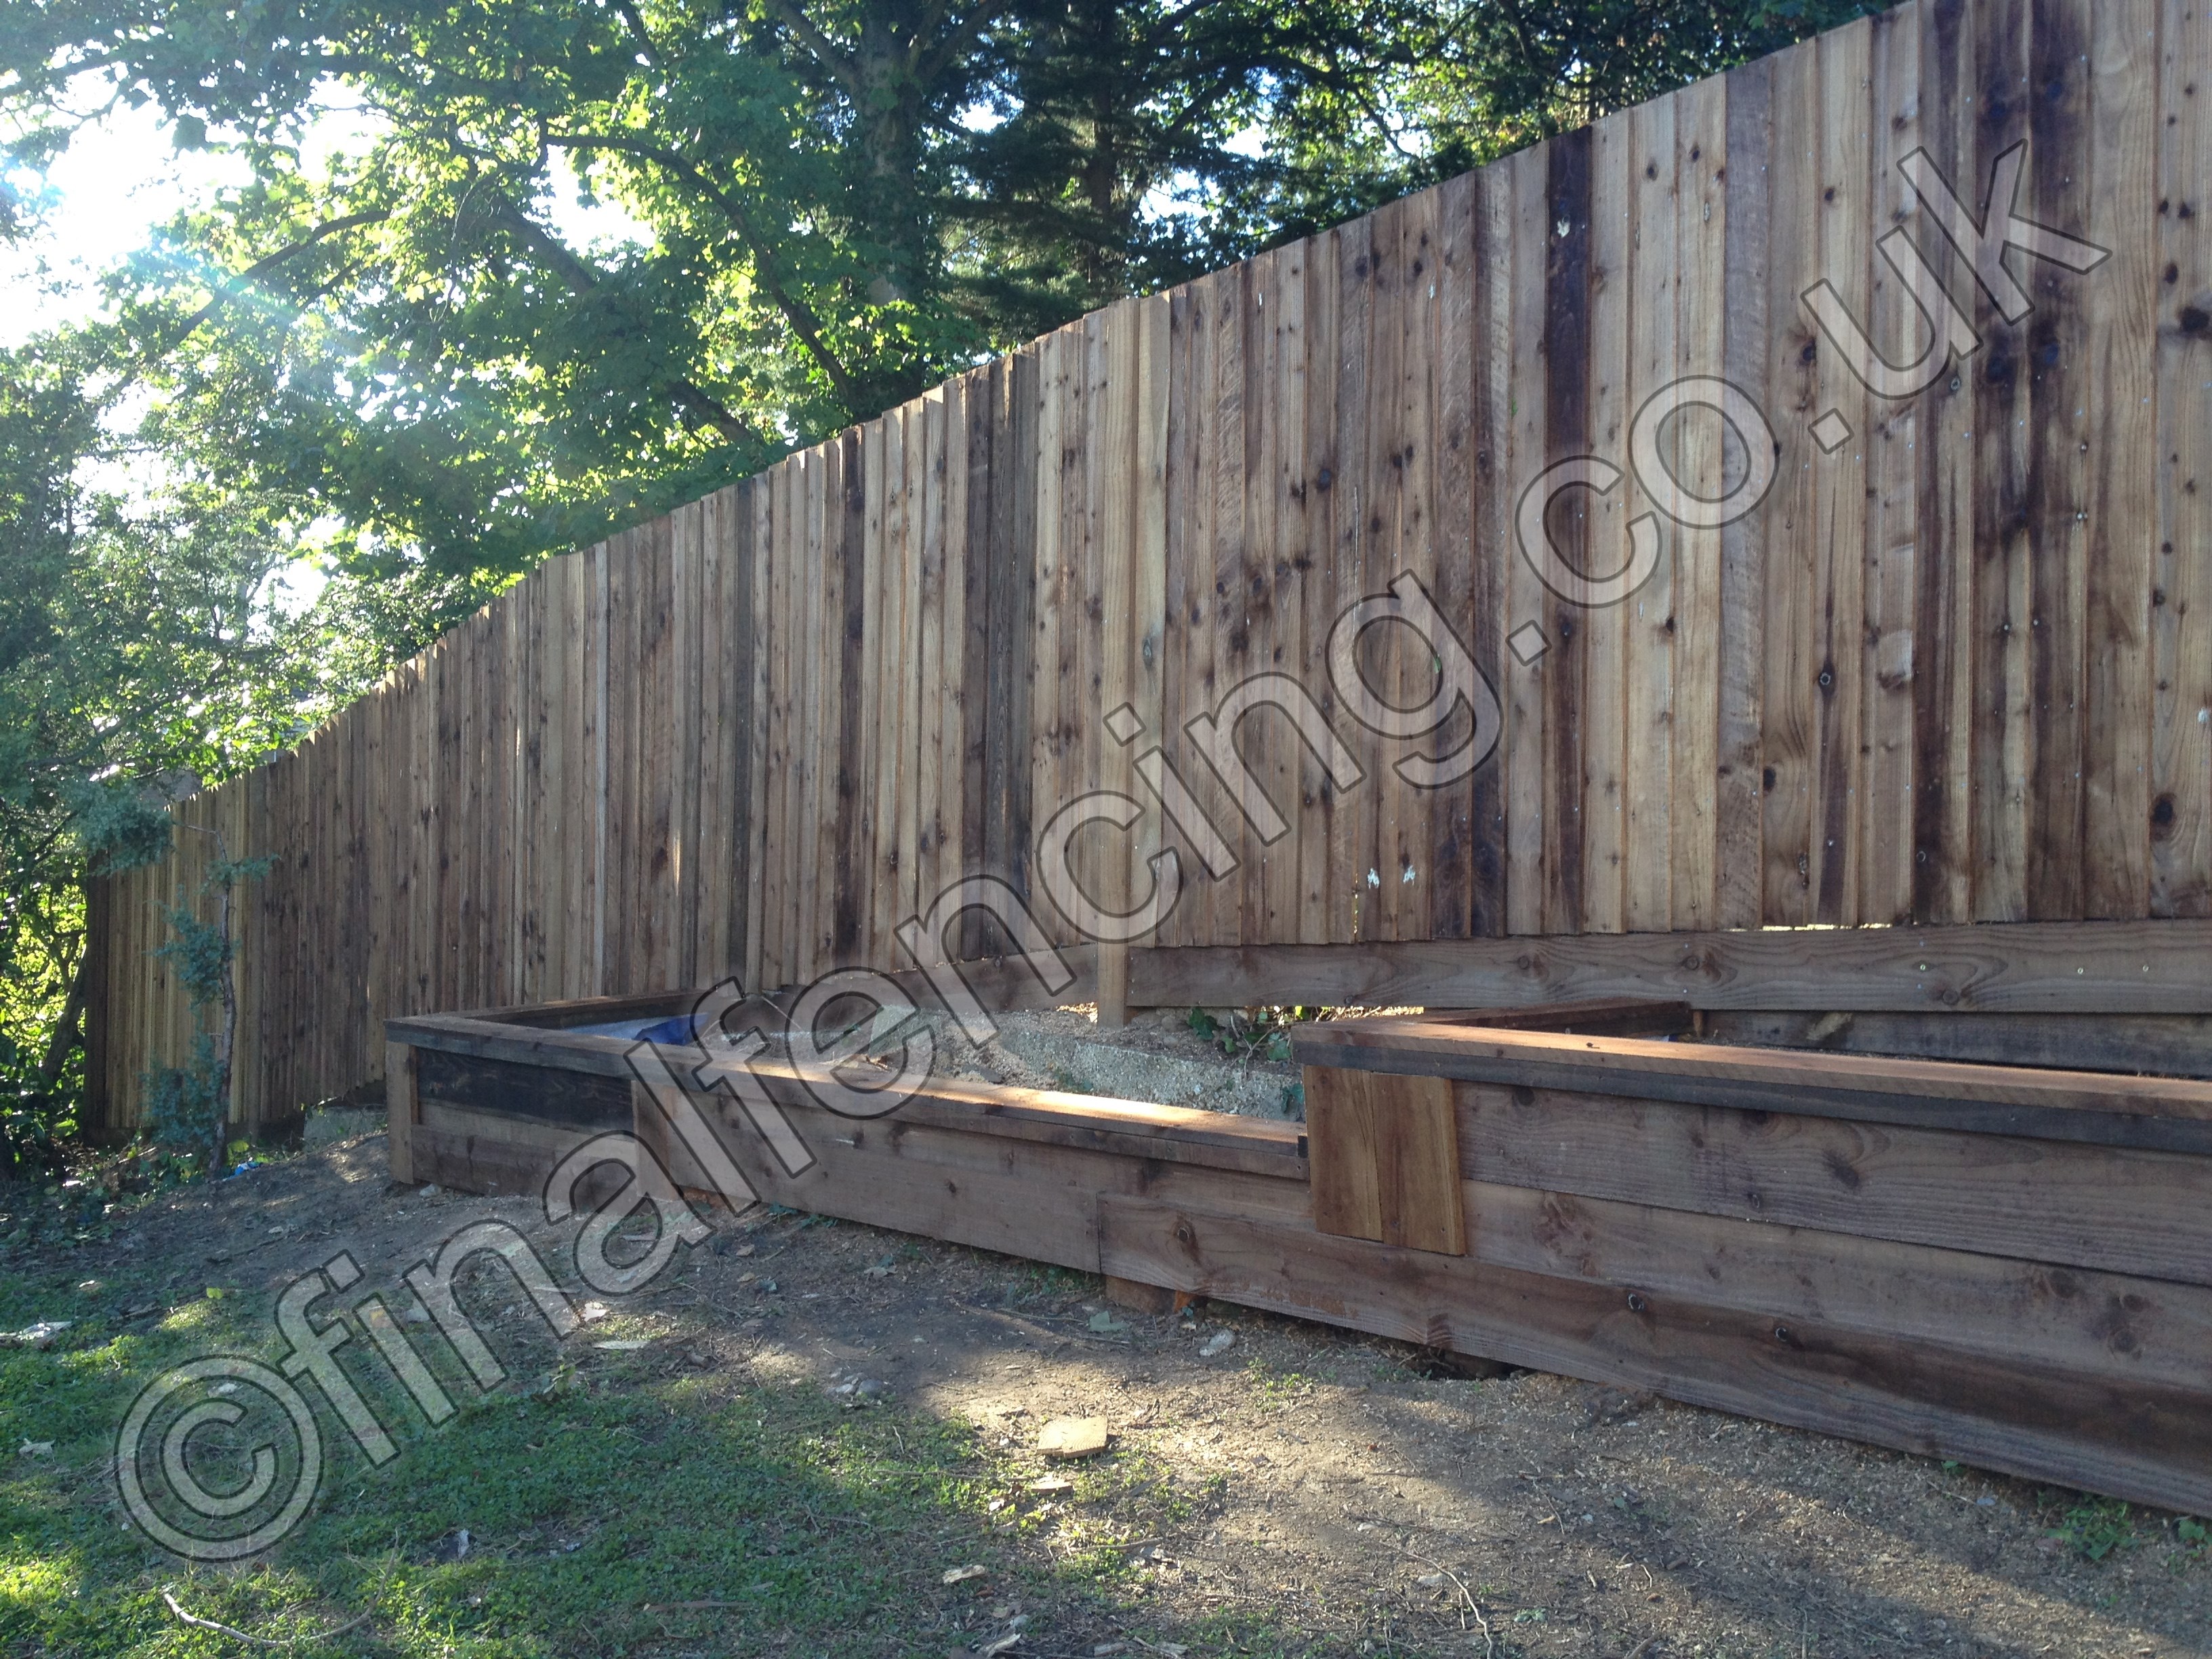 Challenging timber fencing on slope - note sleeper wall not built by Final Fencing